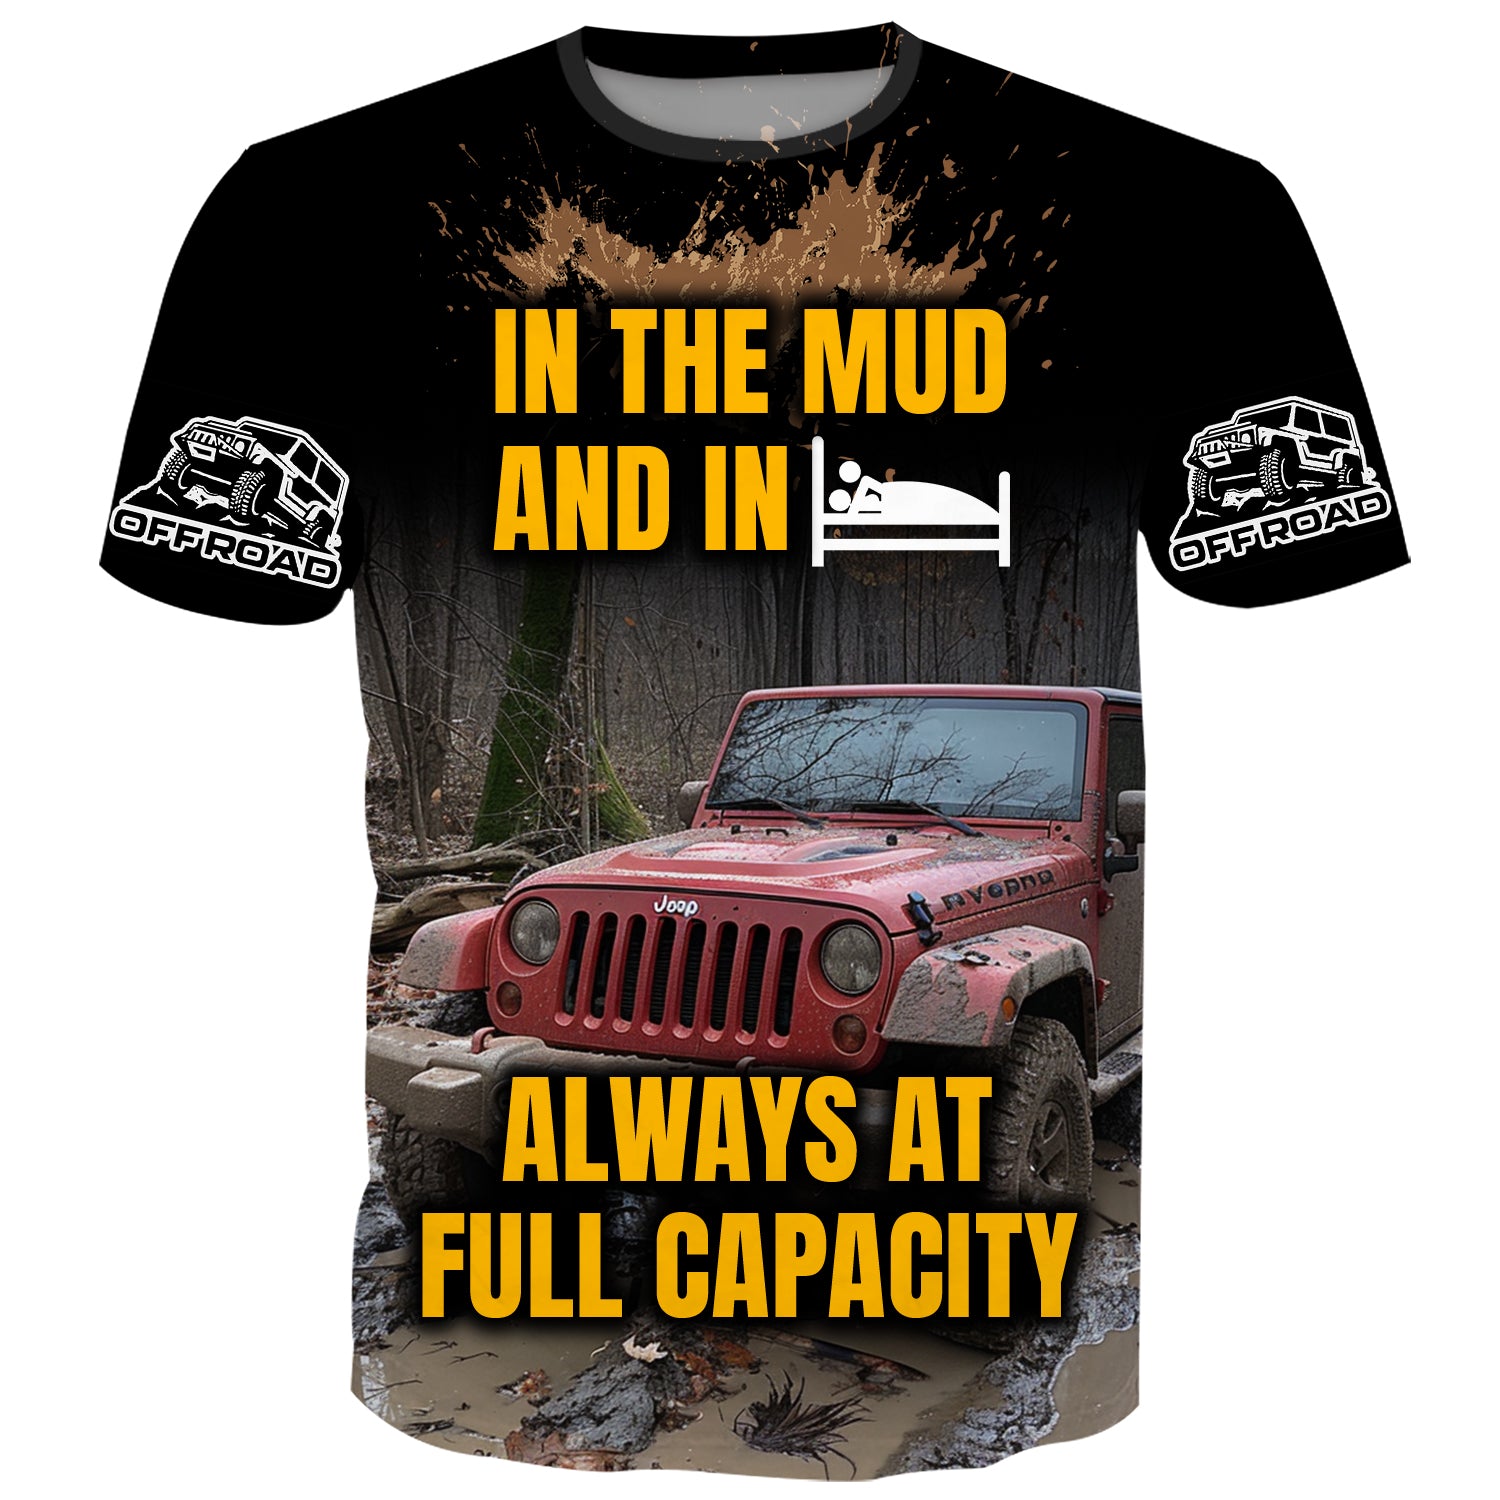 In the mud and in bed, always at full capacity - T-Shirt